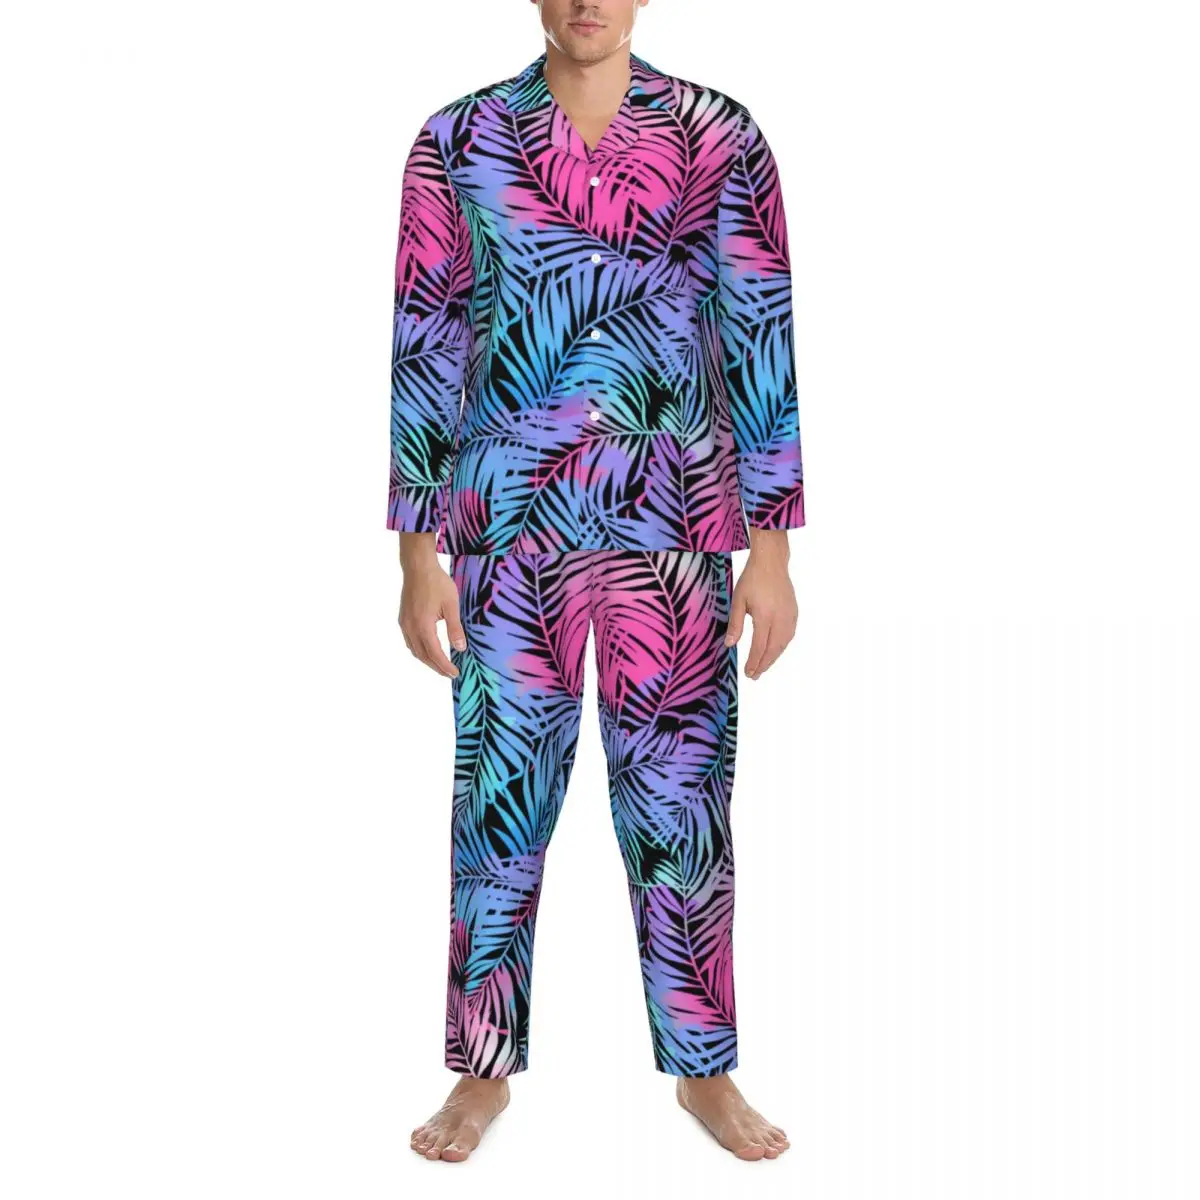 

Tropical Palm Sleepwear Autumn Colorful Leaves Casual Loose Oversized Pajama Set Men Long Sleeves Warm Bedroom Graphic Home Suit